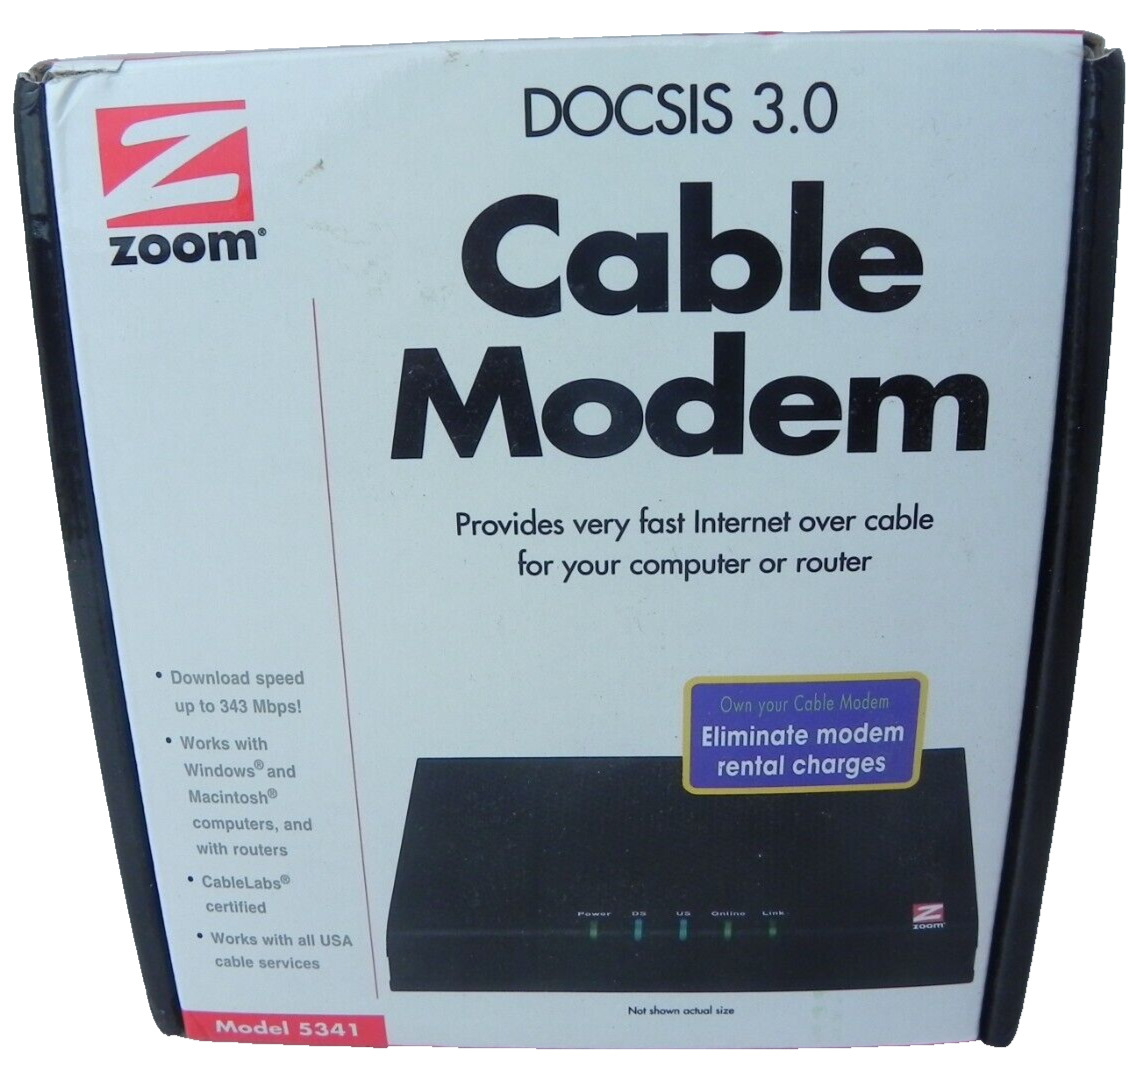 BRAND NEW IN OPEN BOX - Zoom 686 Mbps 16x4 DOCSIS 3.0 Cable Modem Model 5370